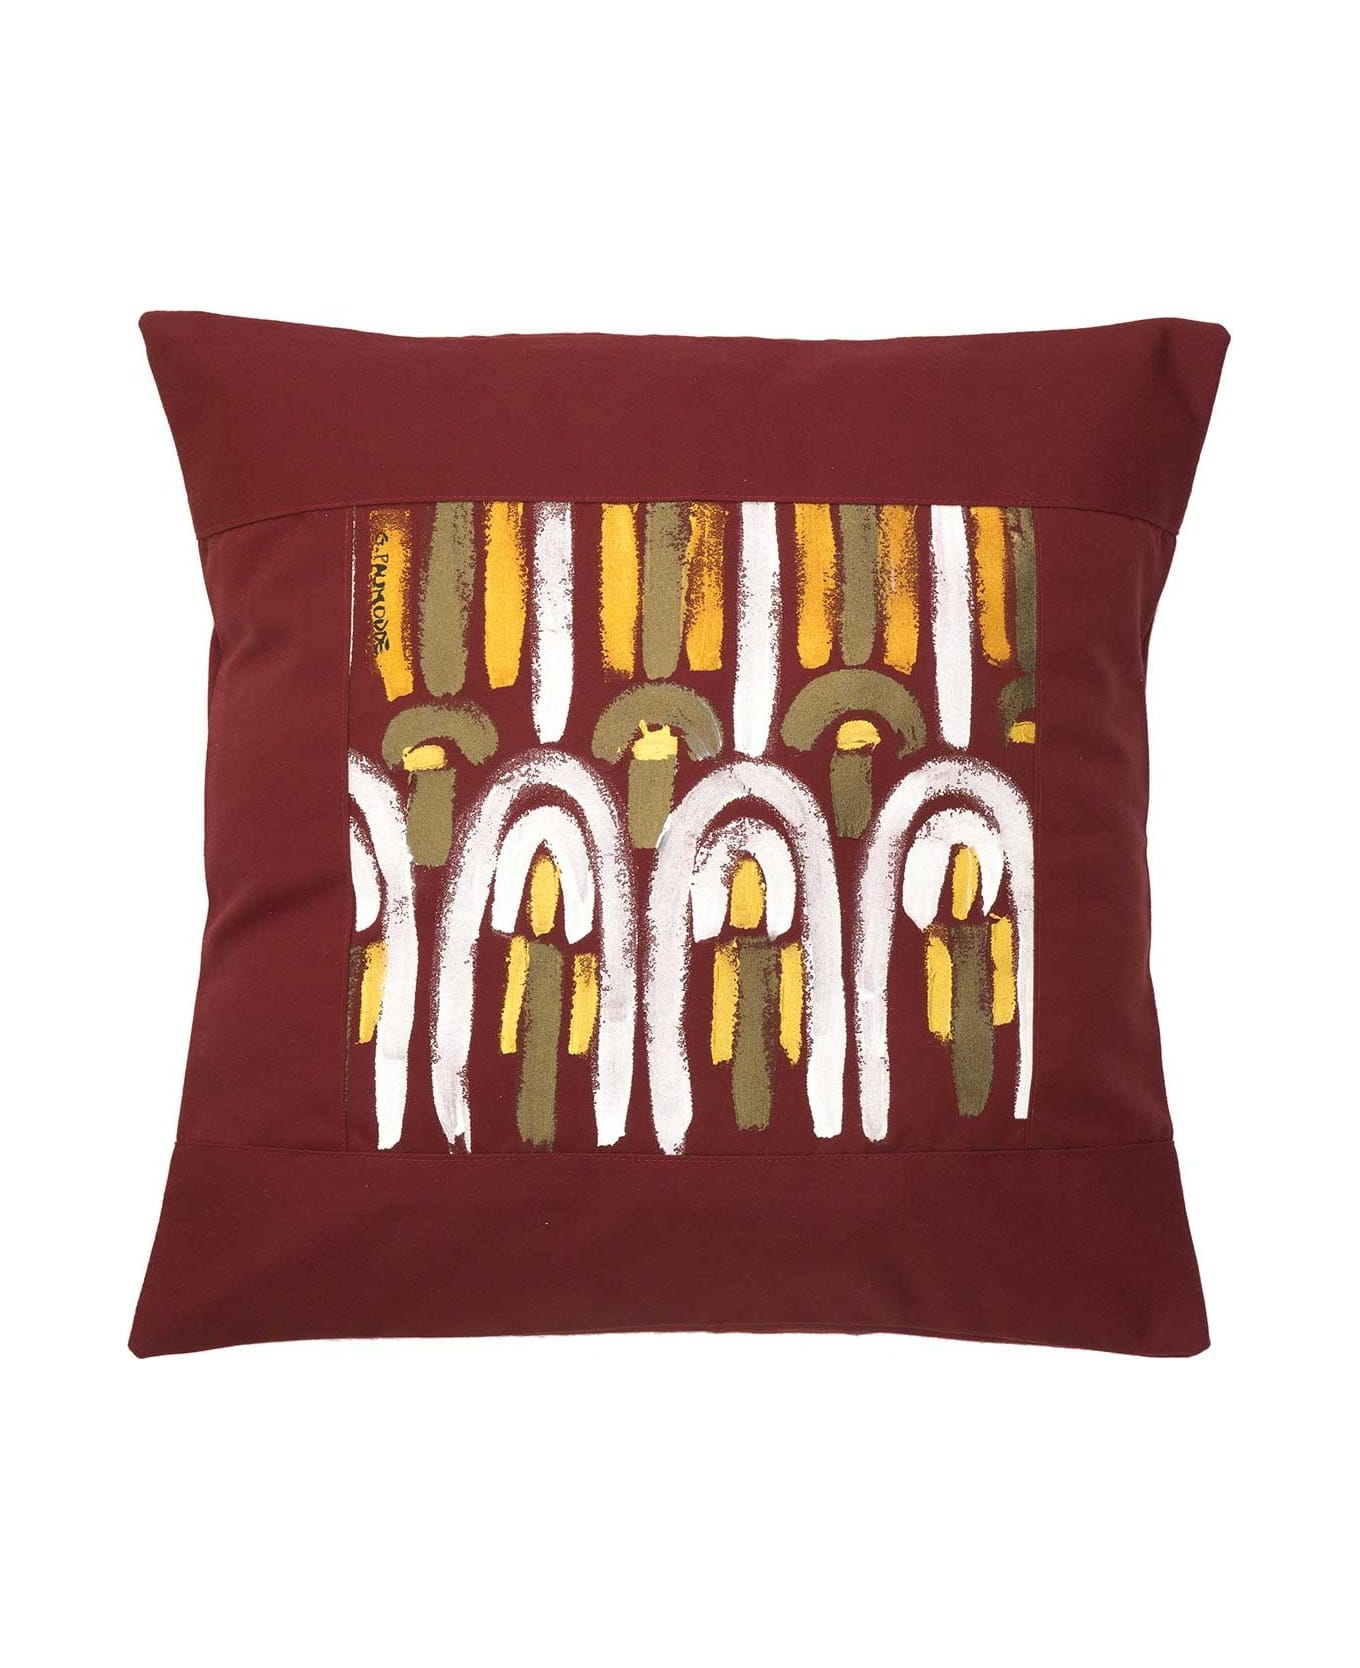 Le Botteghe su Gologone Acrylic Hand Painted Outdoor Cushion 60x60 cm - Red Fantasy